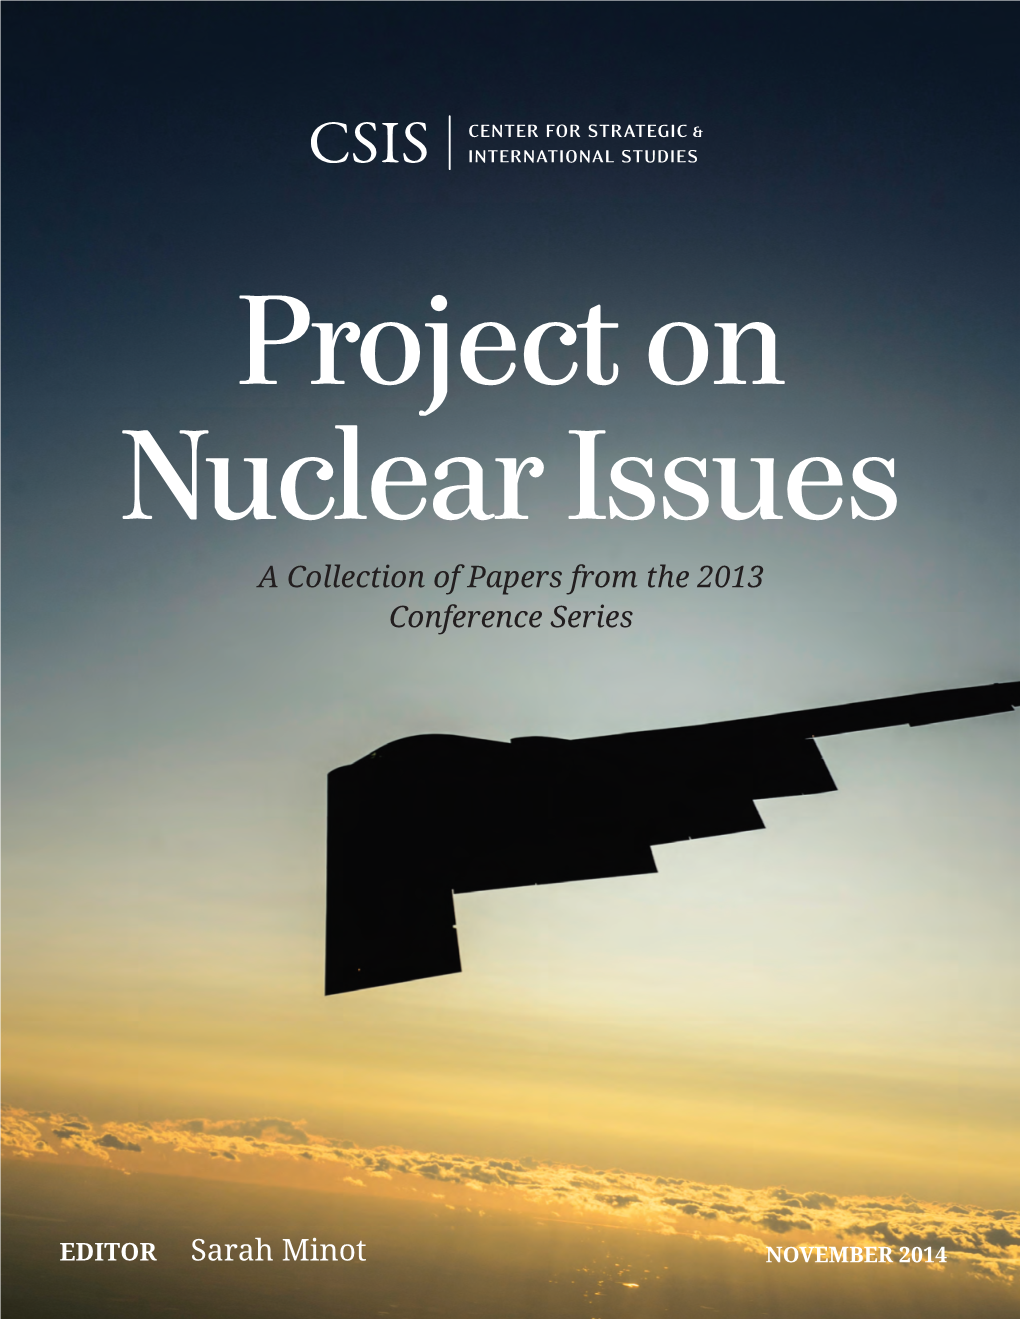 Project on Nuclear Issues: a Collection of Papers from the 2013 Conference Series Project on Nuclear Issues a Collection of Papers from the 2013 Conference Series